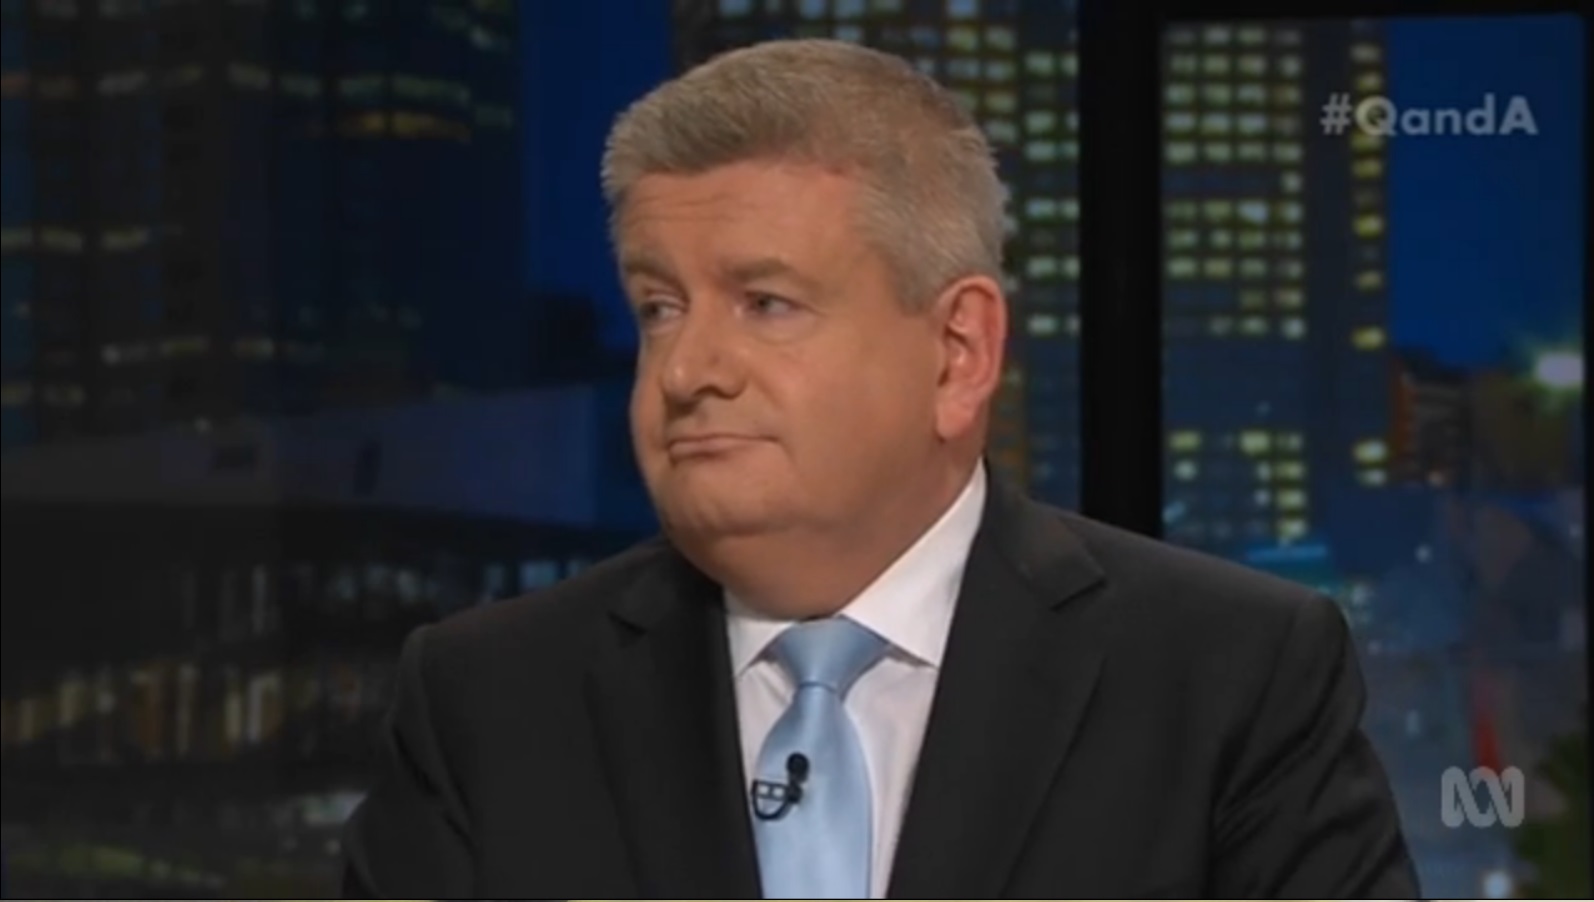 Communications Minister Mitch Fifield on Q&A